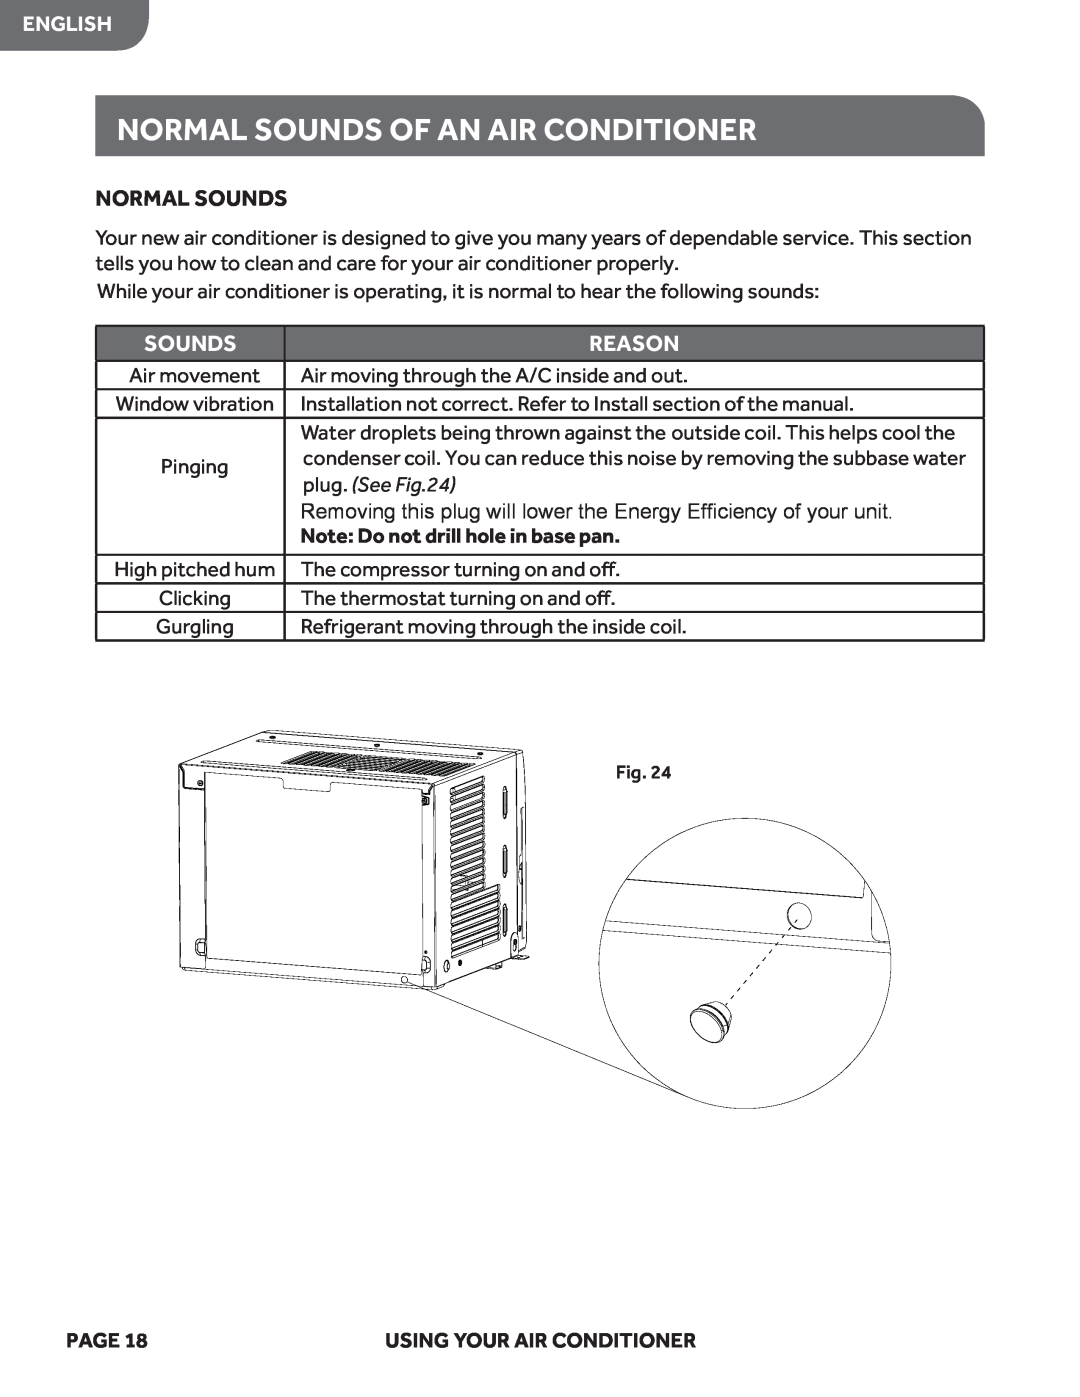 Haier HWF05XCL Normal Sounds Of An Air Conditioner, Reason, English, plug. See, Note Do not drill hole in base pan, Page 